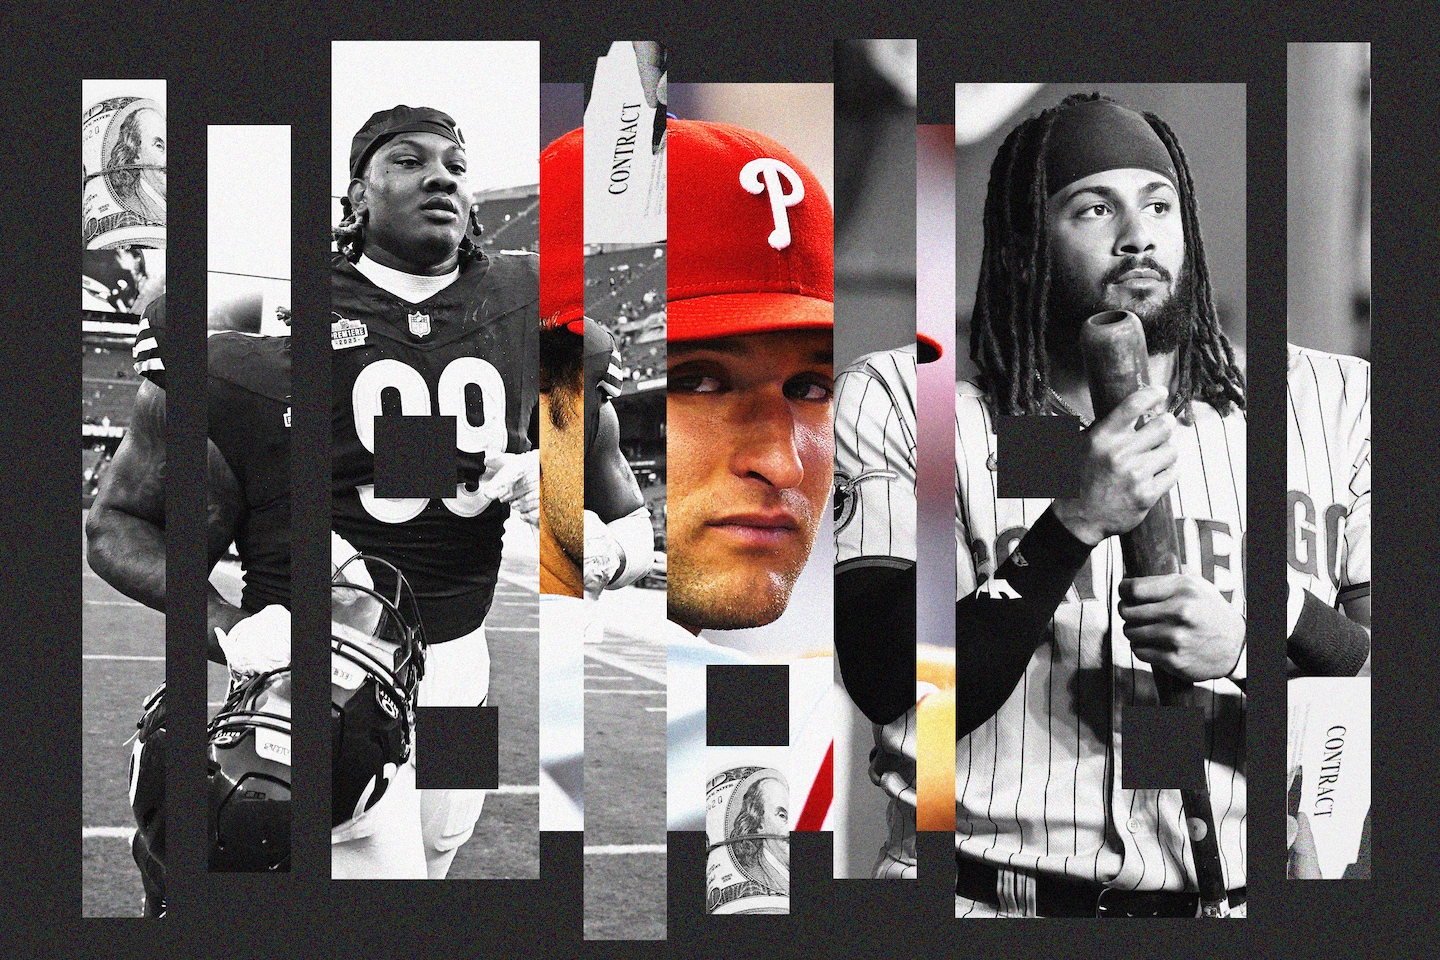 A firm targeted MLB stars’ pay. Next up: College athletes.